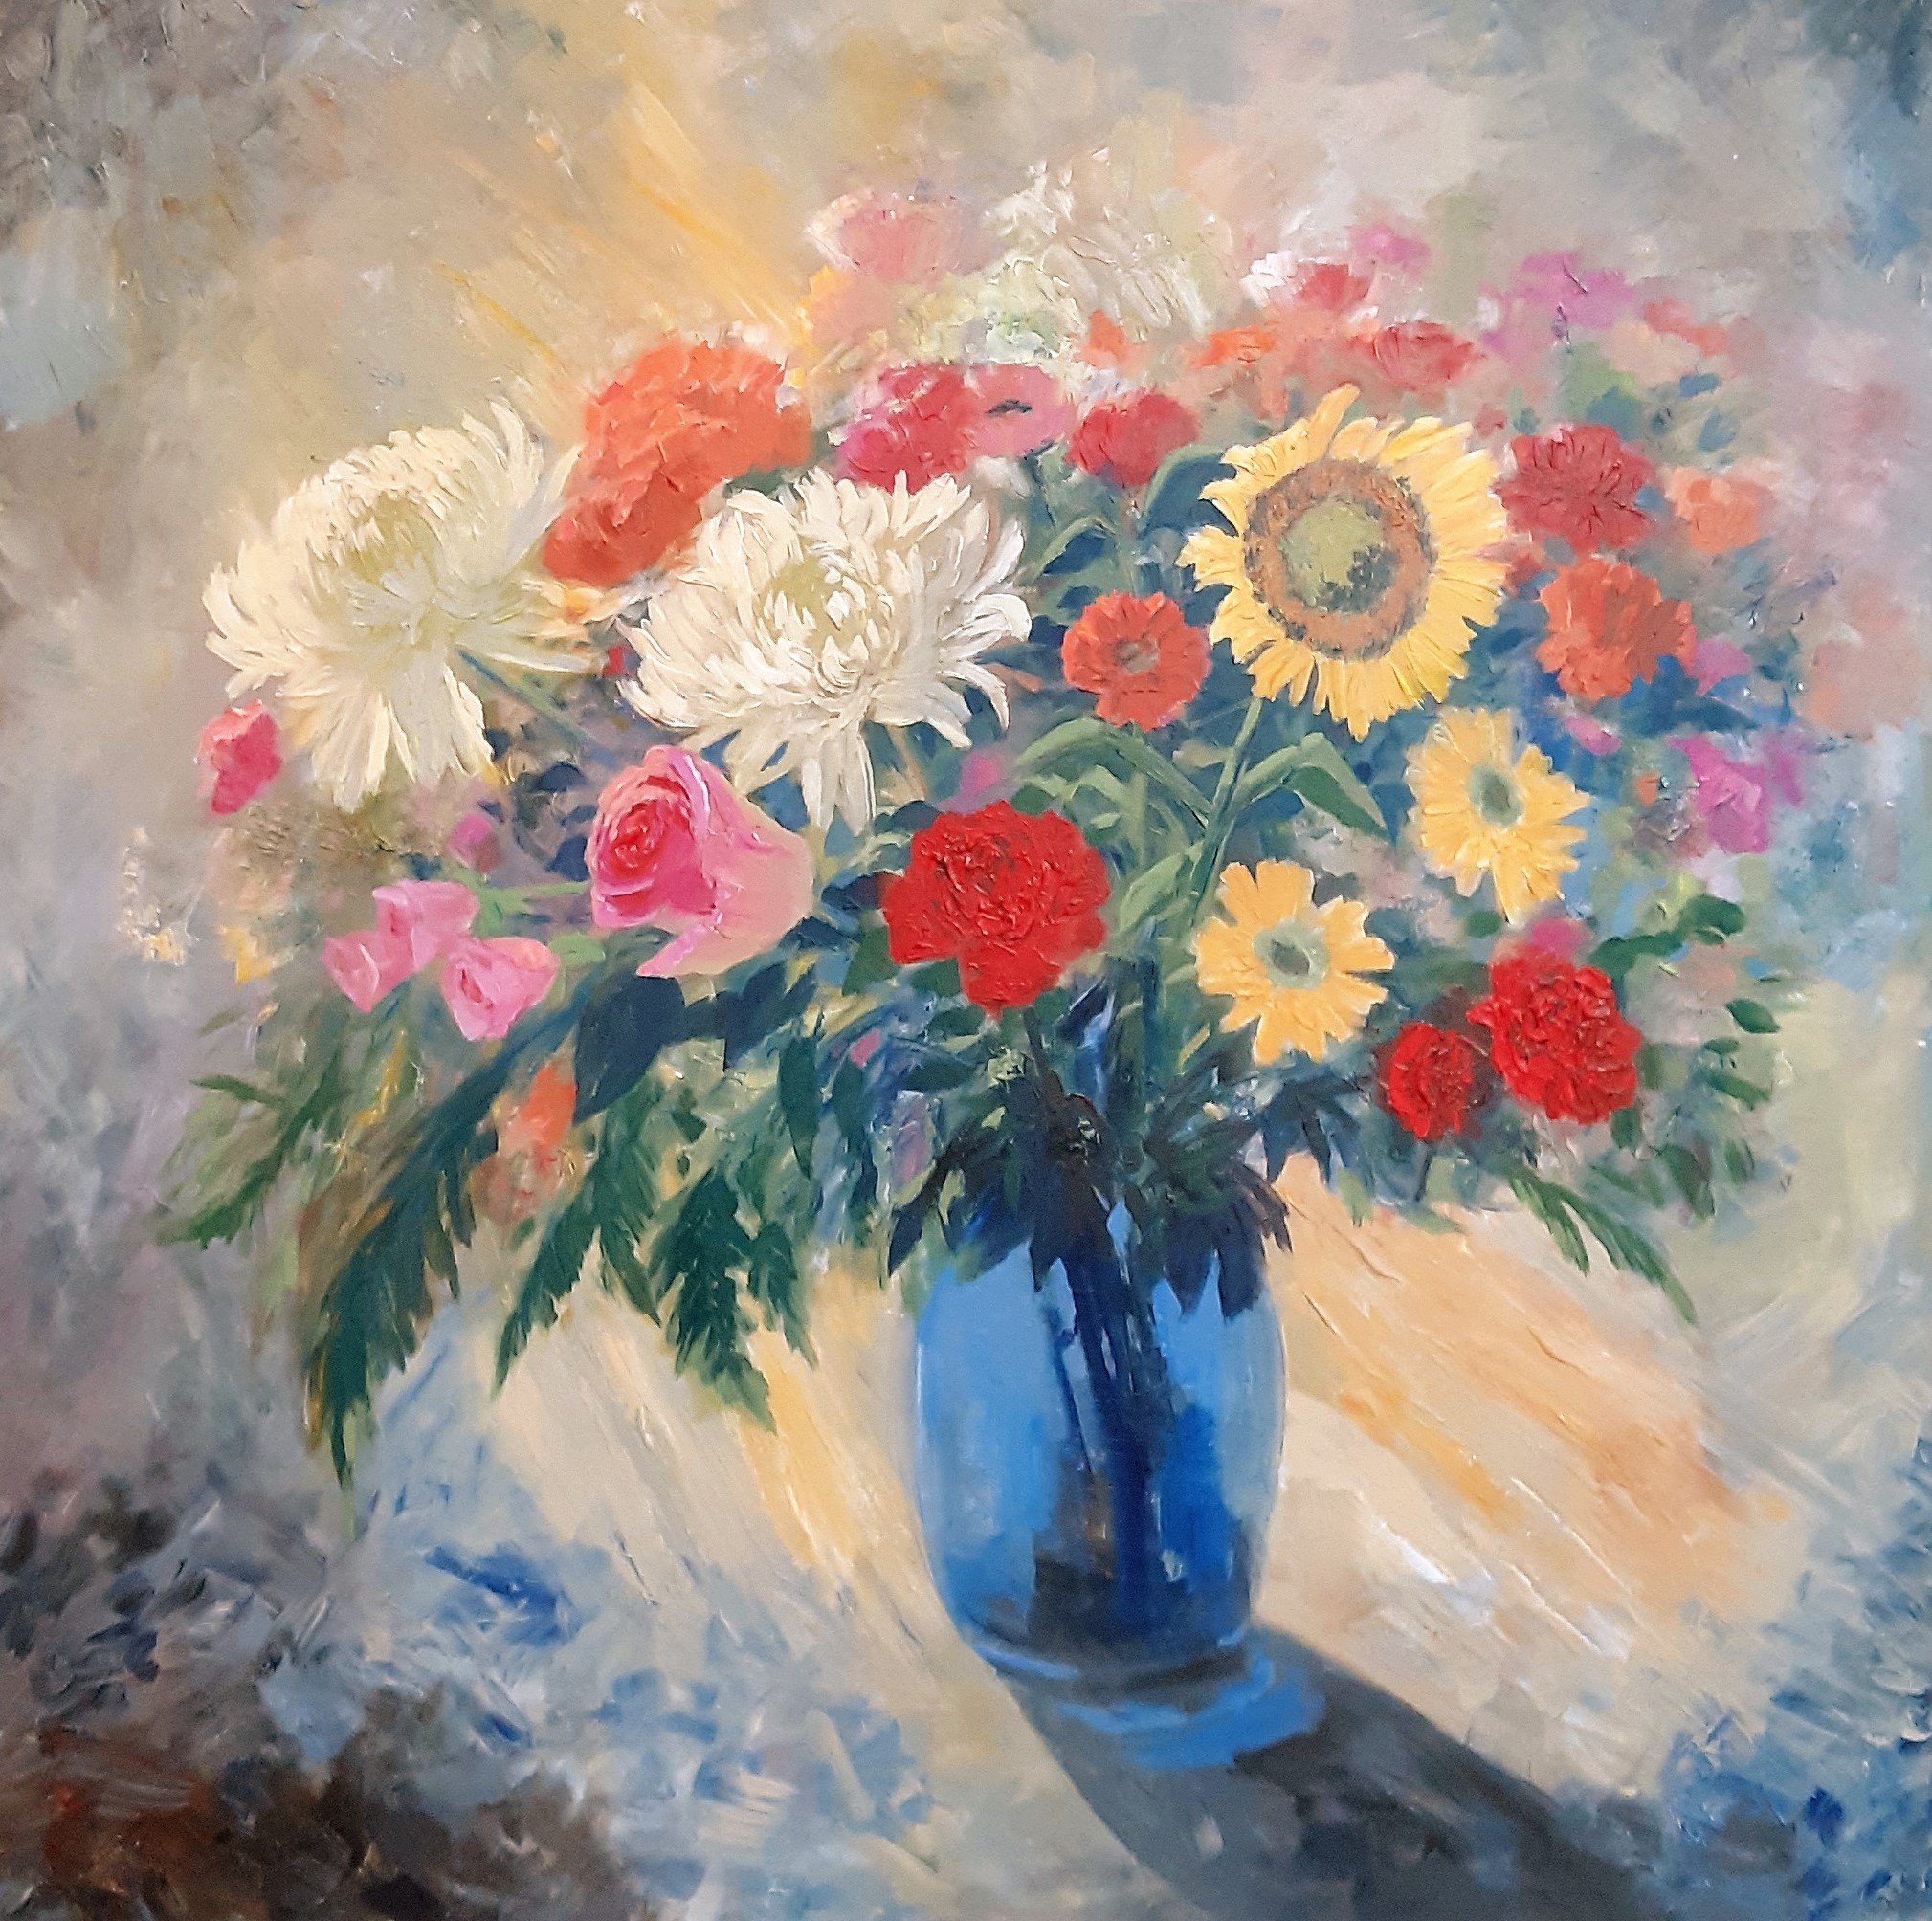 SOLD, Flowers in a Blue Glass Vase Painting, Acrylic on Canvas, Copyright 2021 Hirschten